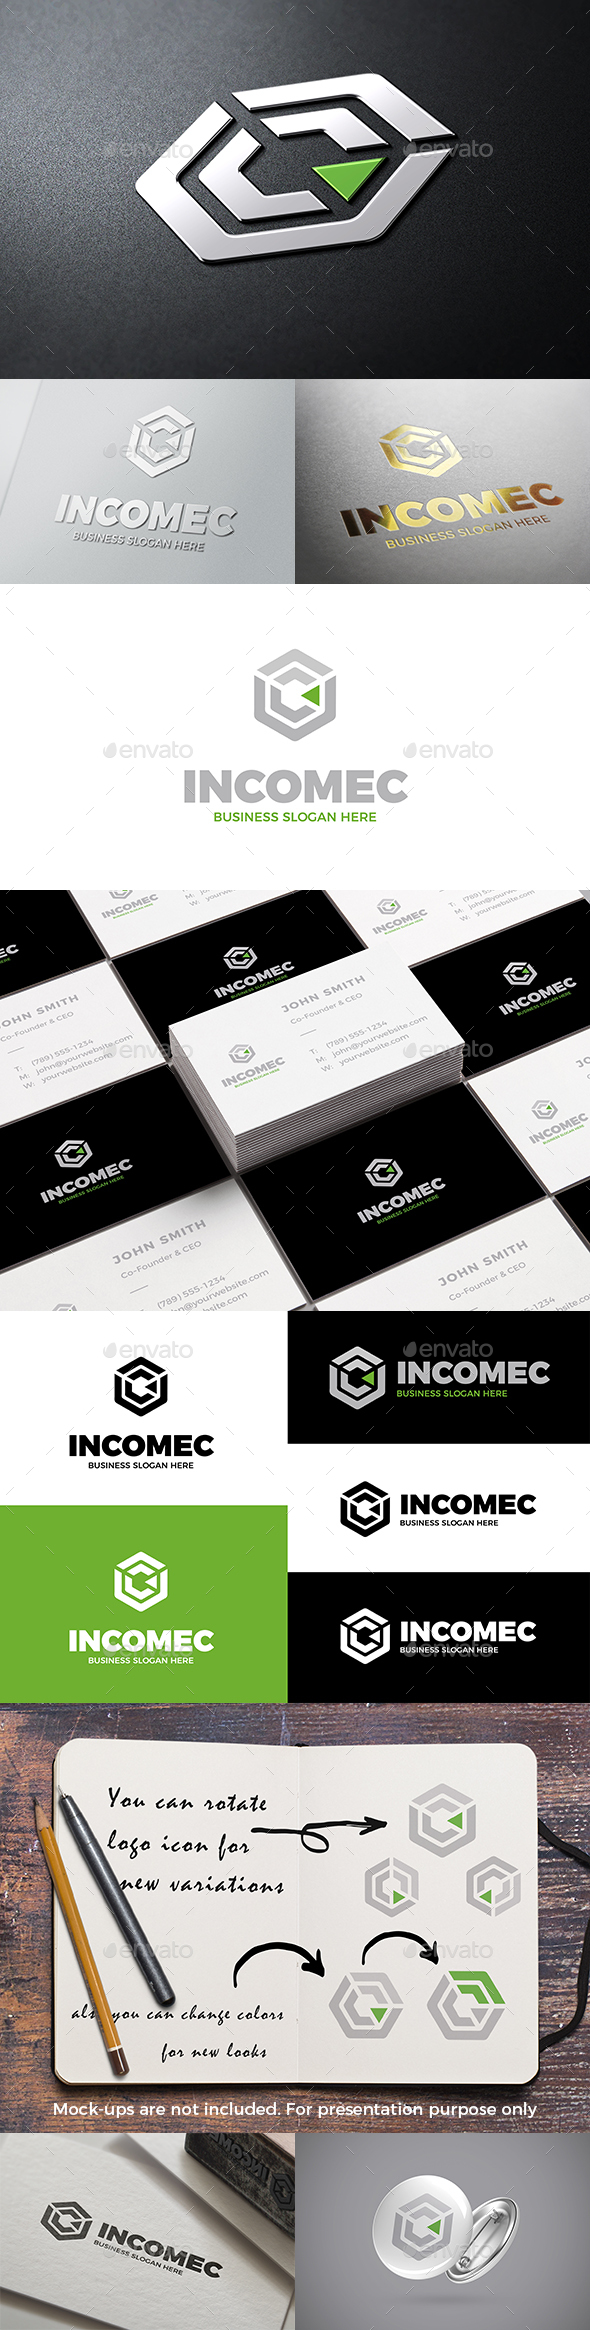 [DOWNLOAD]Abstract Cube Income C Symbol Logo